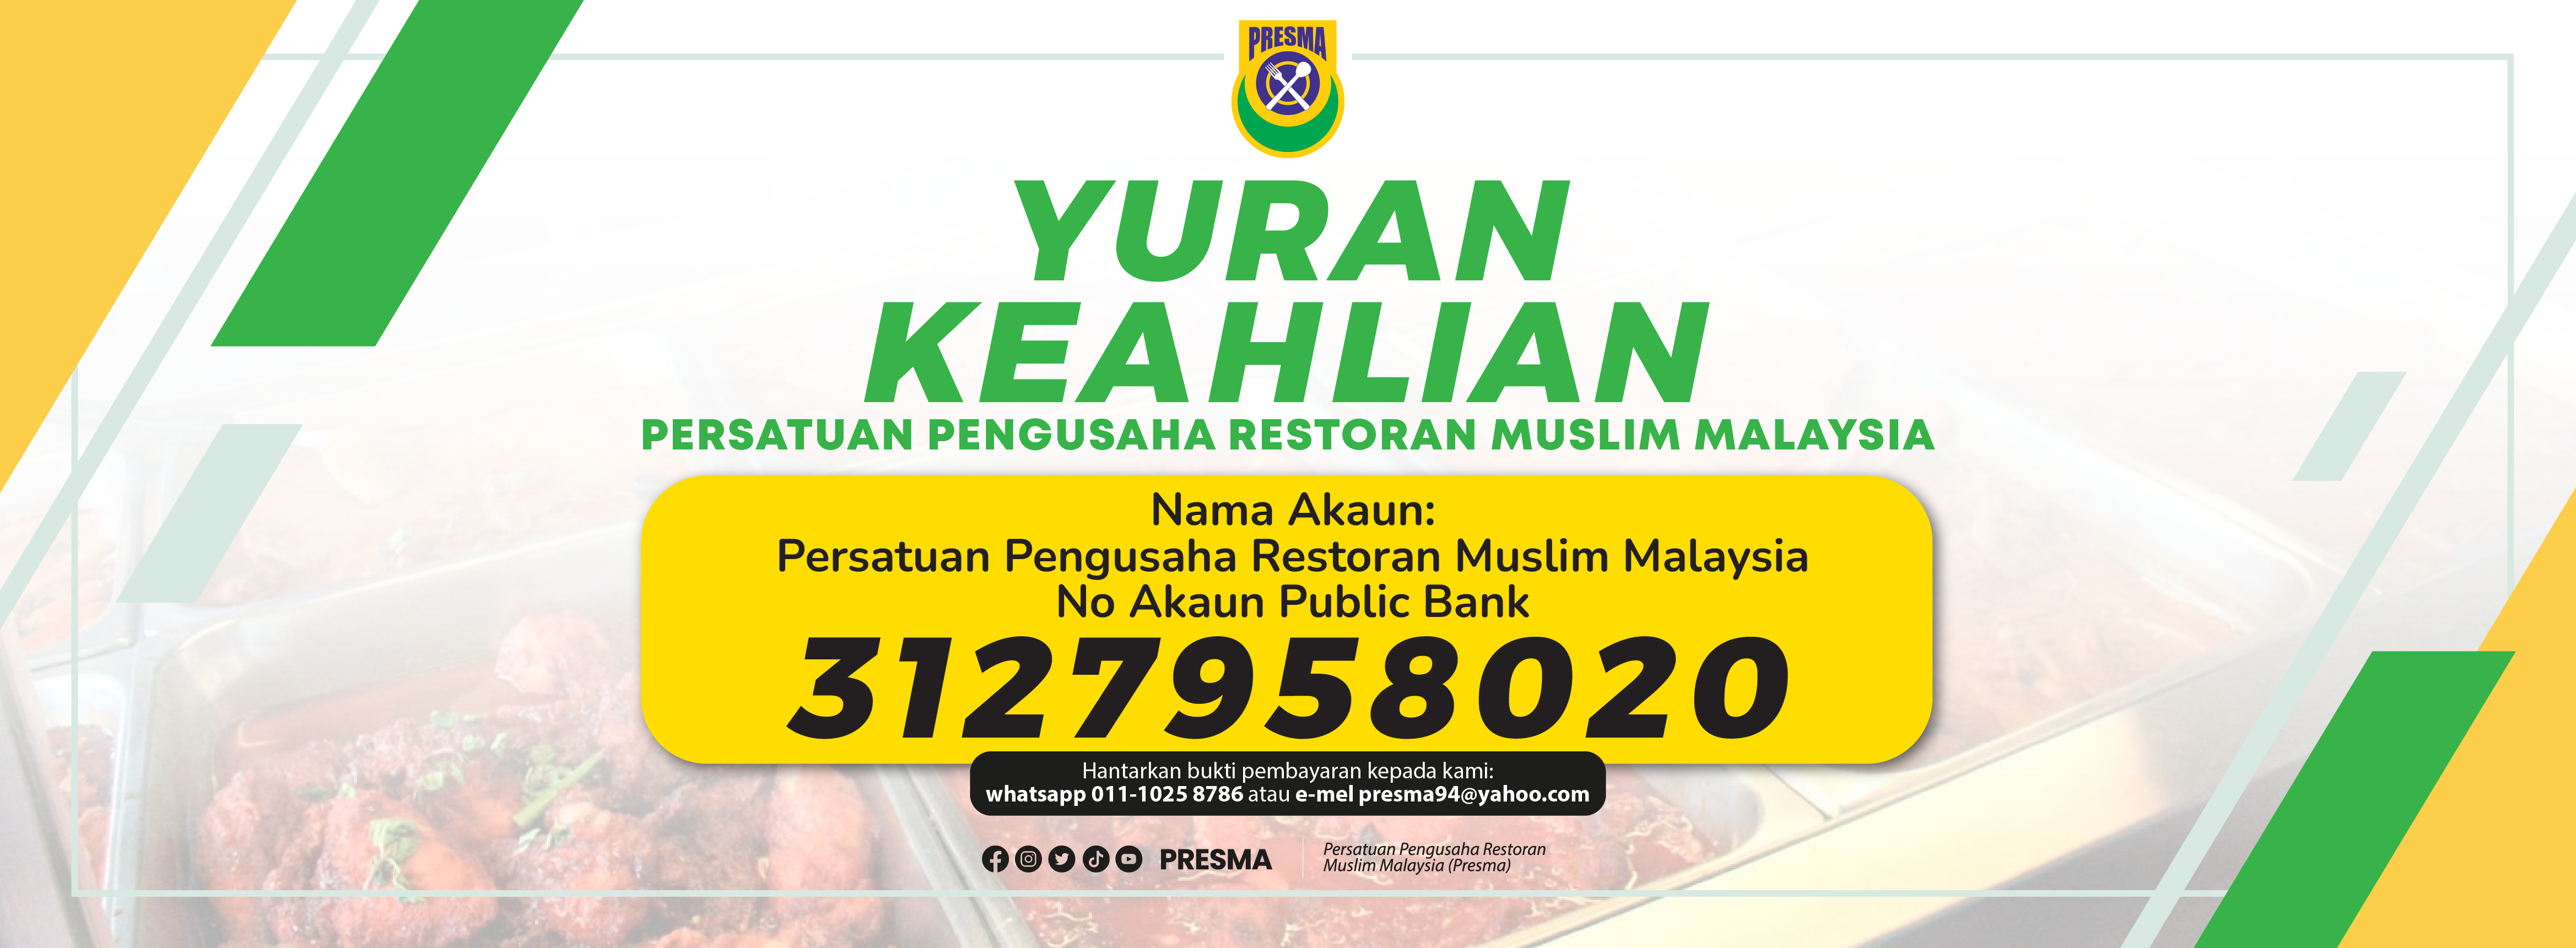 Website Banner And Square YURAN 01